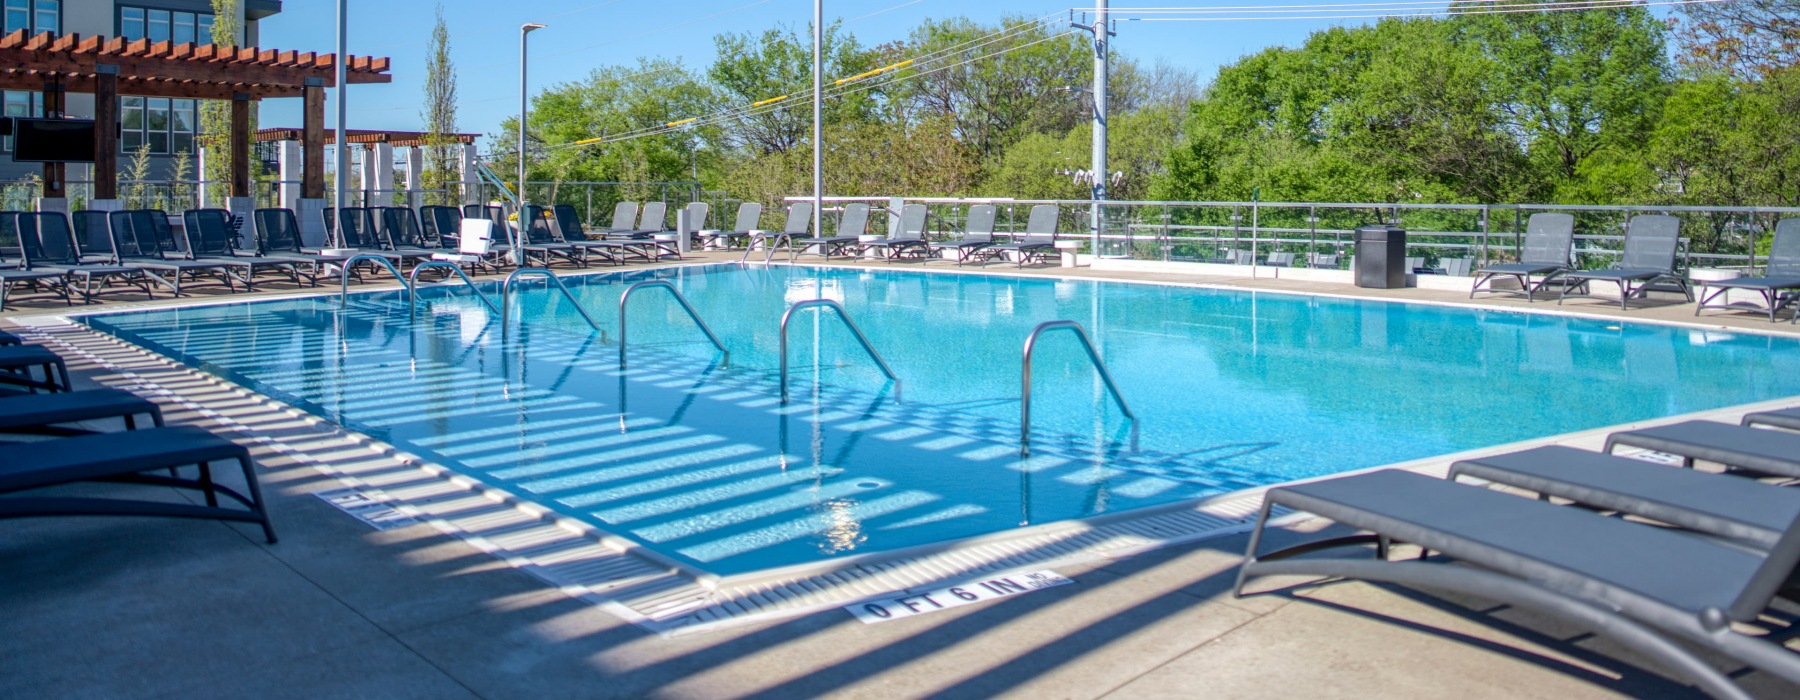 Zero-entry pool with poolside lounge chairs at Residences at Capitol View Apartments